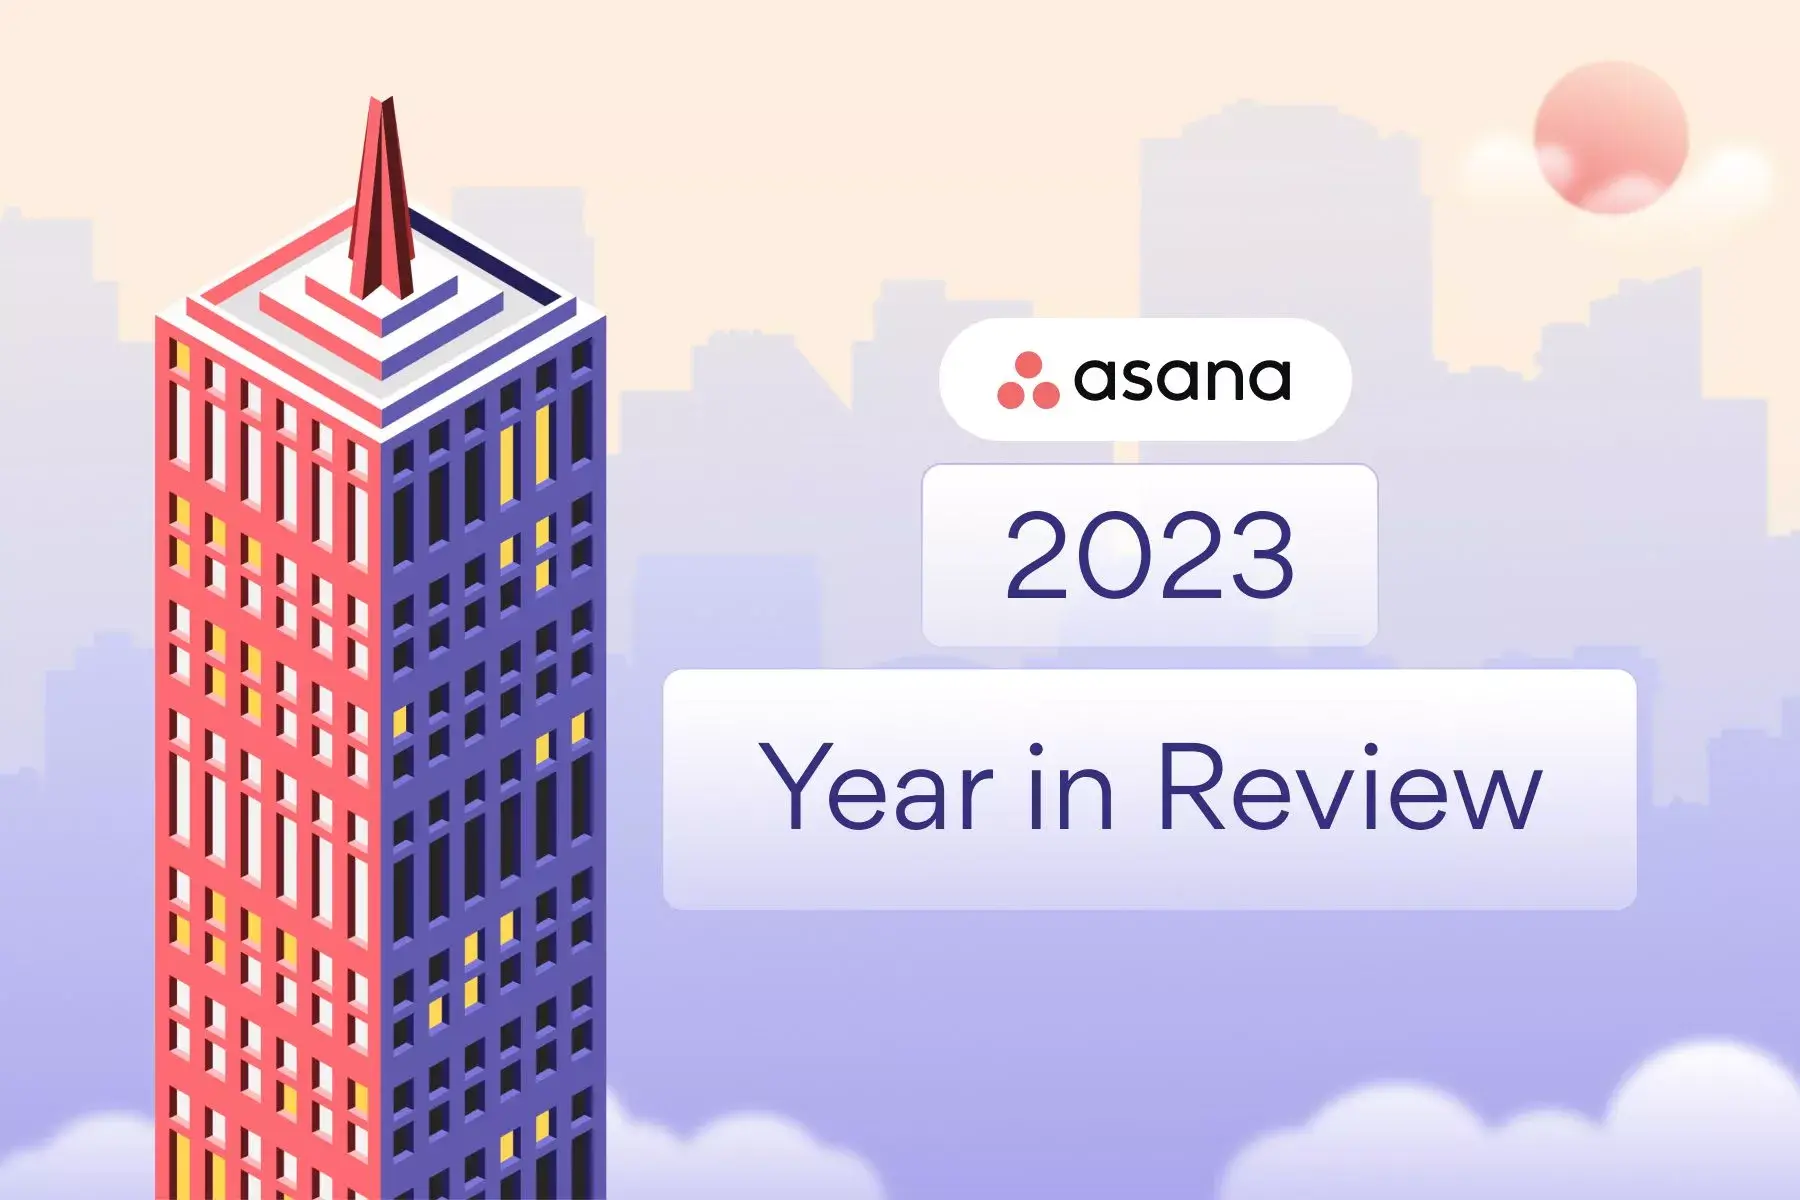 Header image for a blog post on Asana's year in review. Featuring an illustration of a building and the words "Asana Year in Review 2023"